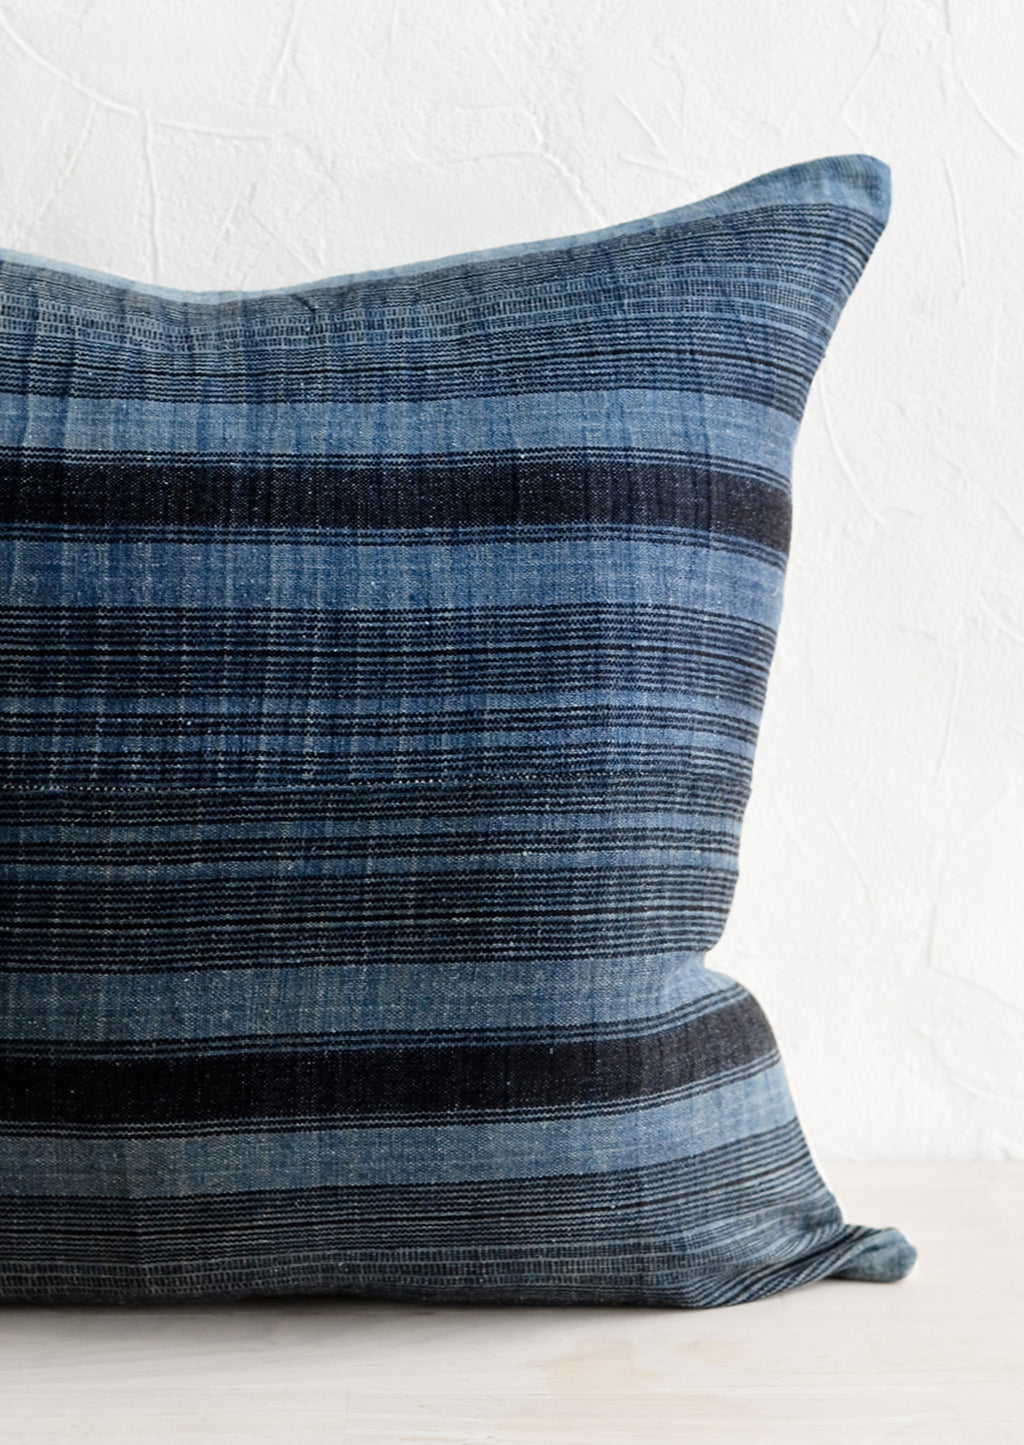 2: A throw pillow in indigo fabric with variegated black stripes.